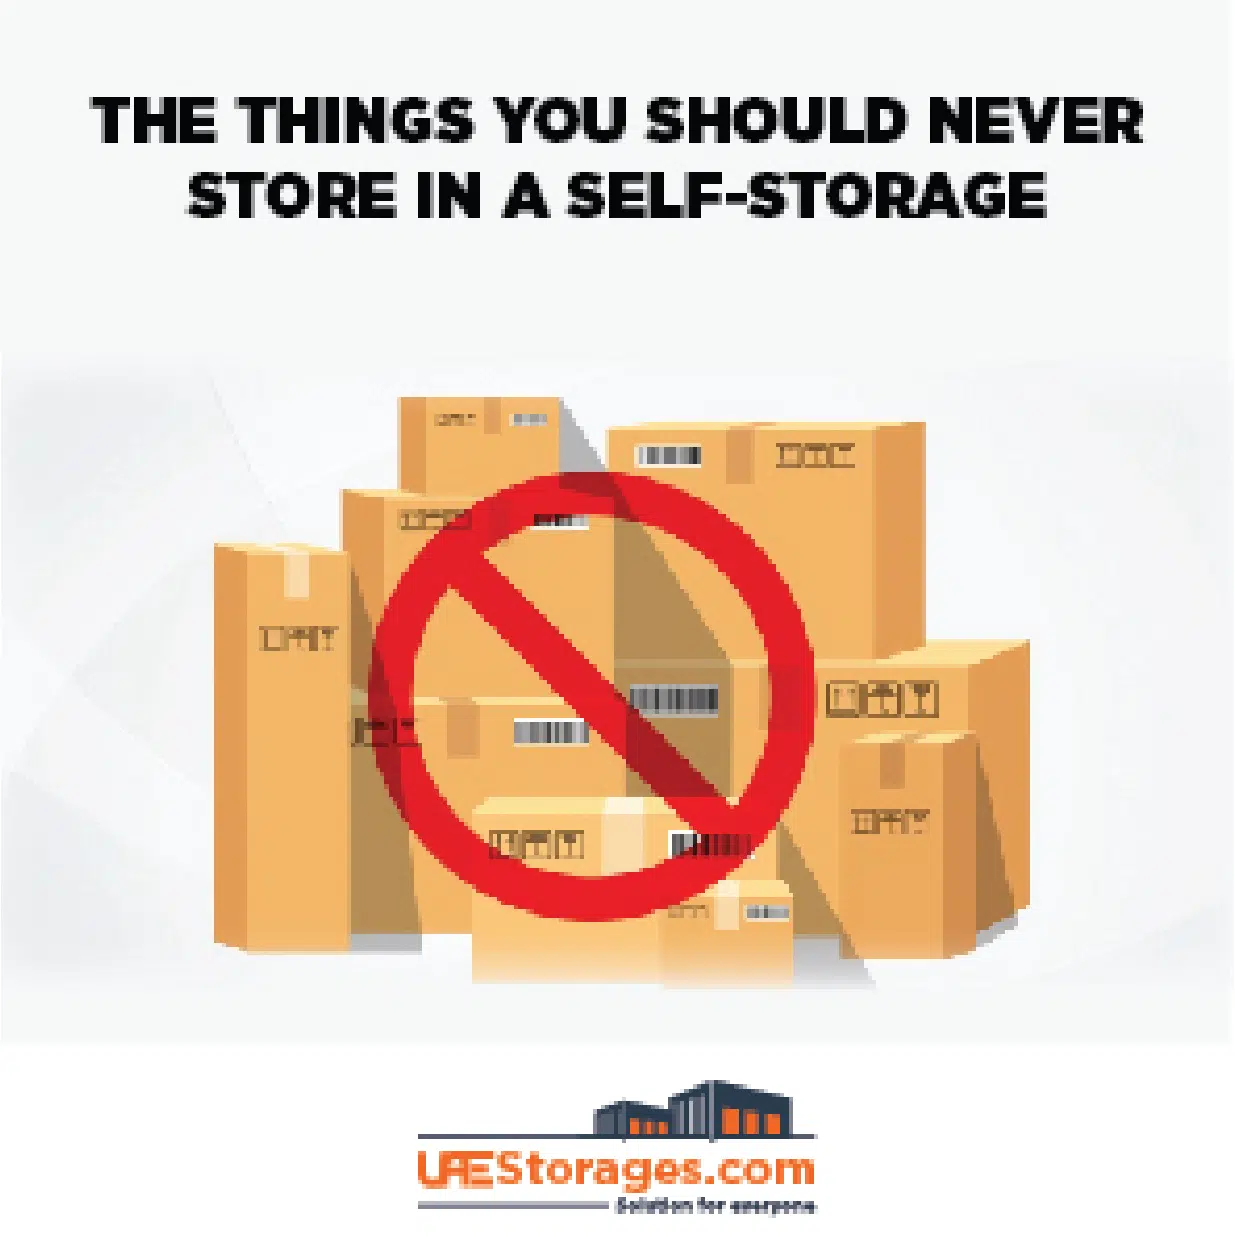 A Blog image saying The Things You Should Never Store in a Self Storage